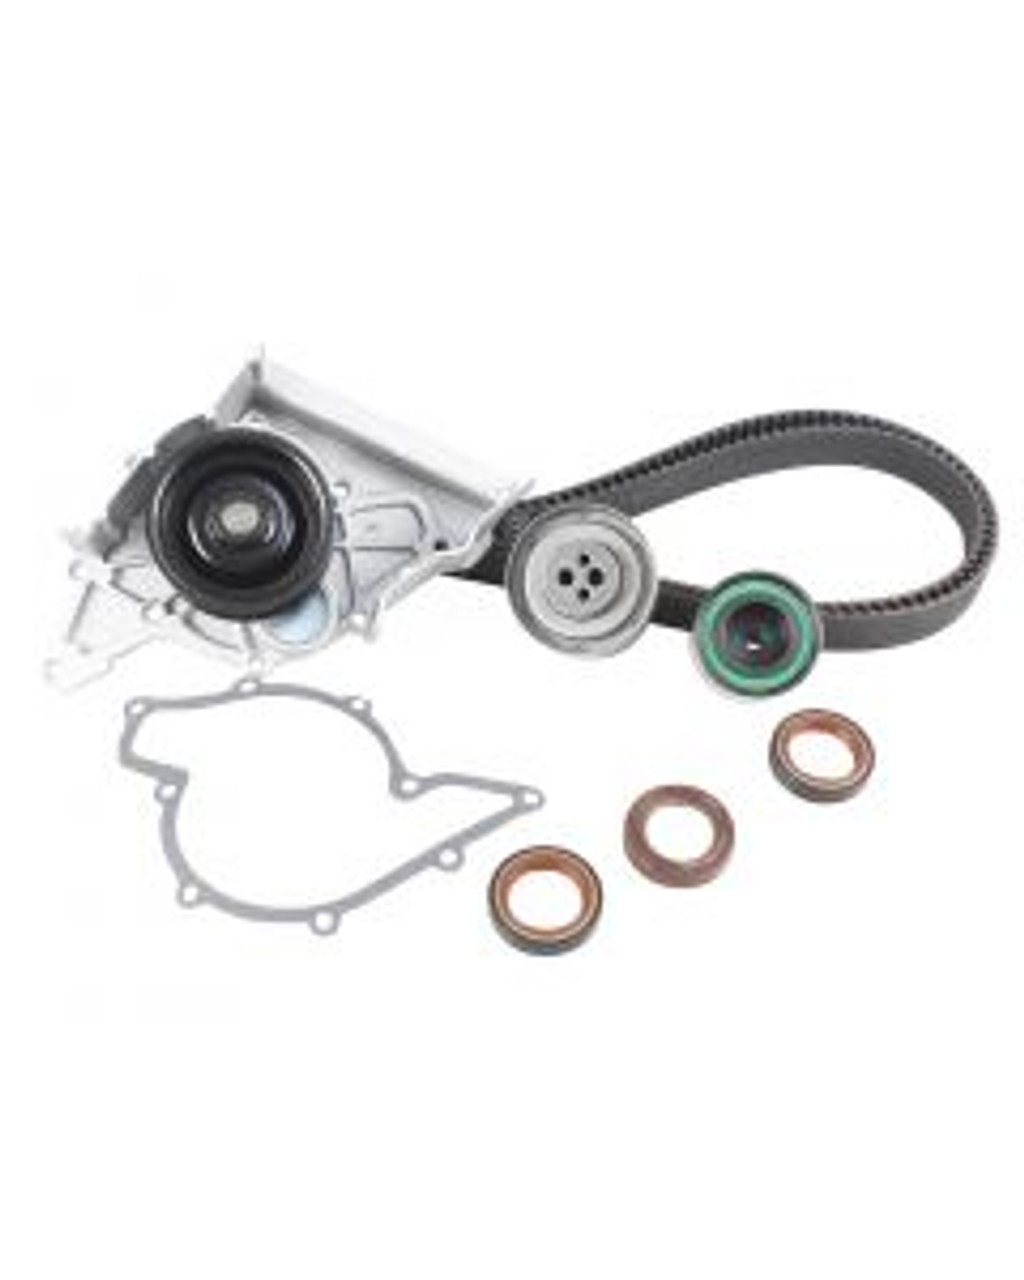 Timing Belt Kit with Water Pump 2.8L 1995 Audi Cabriolet - TBK806WP.14